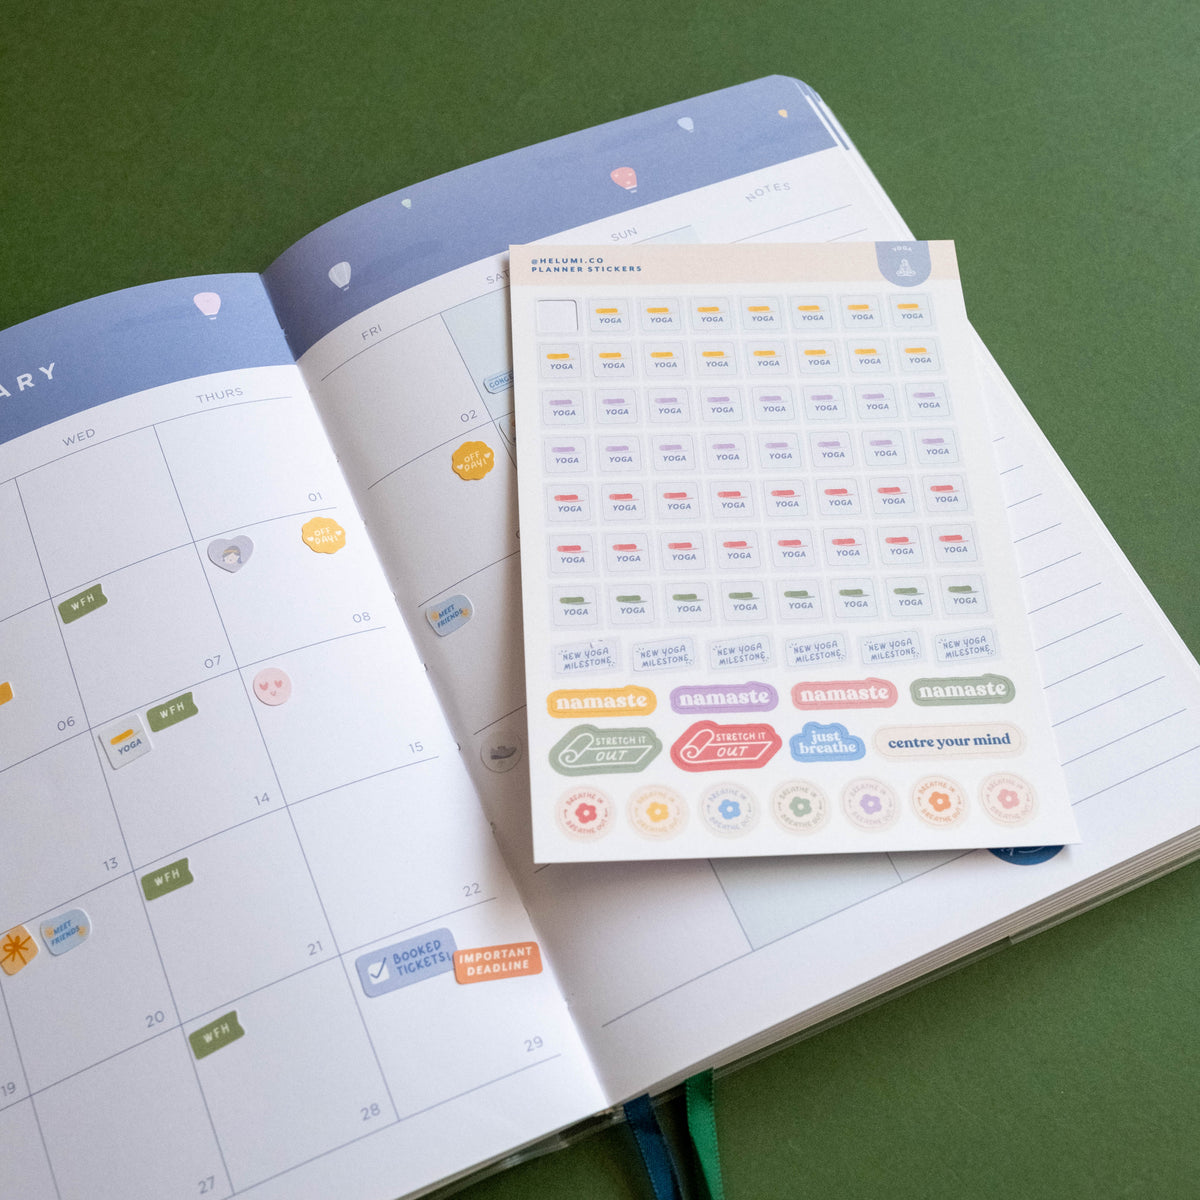 Yoga - Colour-coded Planner Sticker Sheet